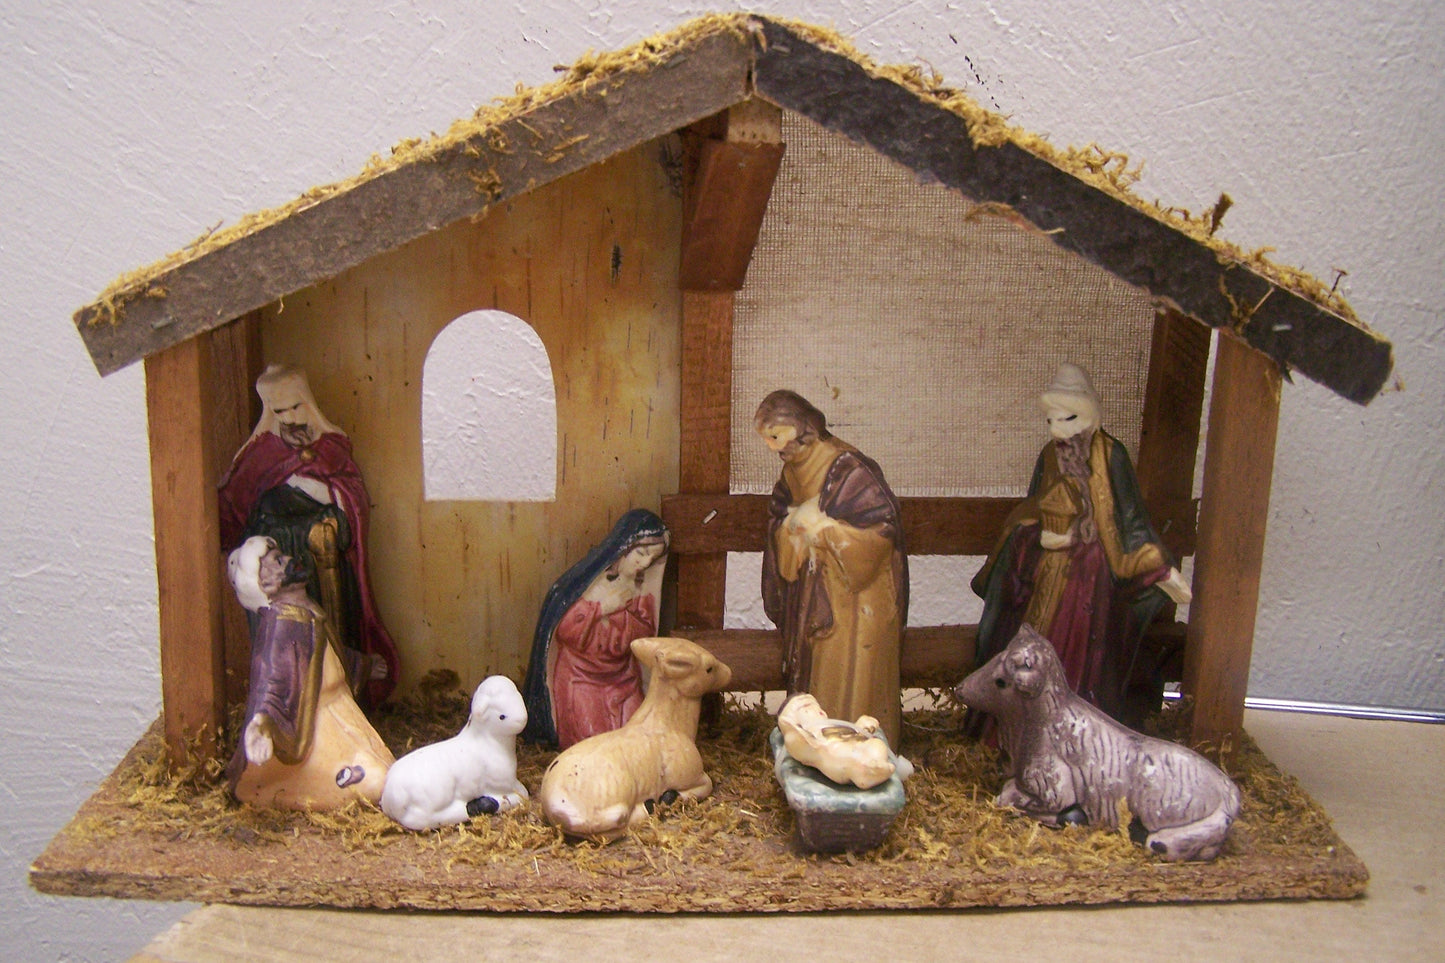 1980s Larger Tabletop Basic Wooden Nativity Set, Resin Figurines  #2 - Mexico